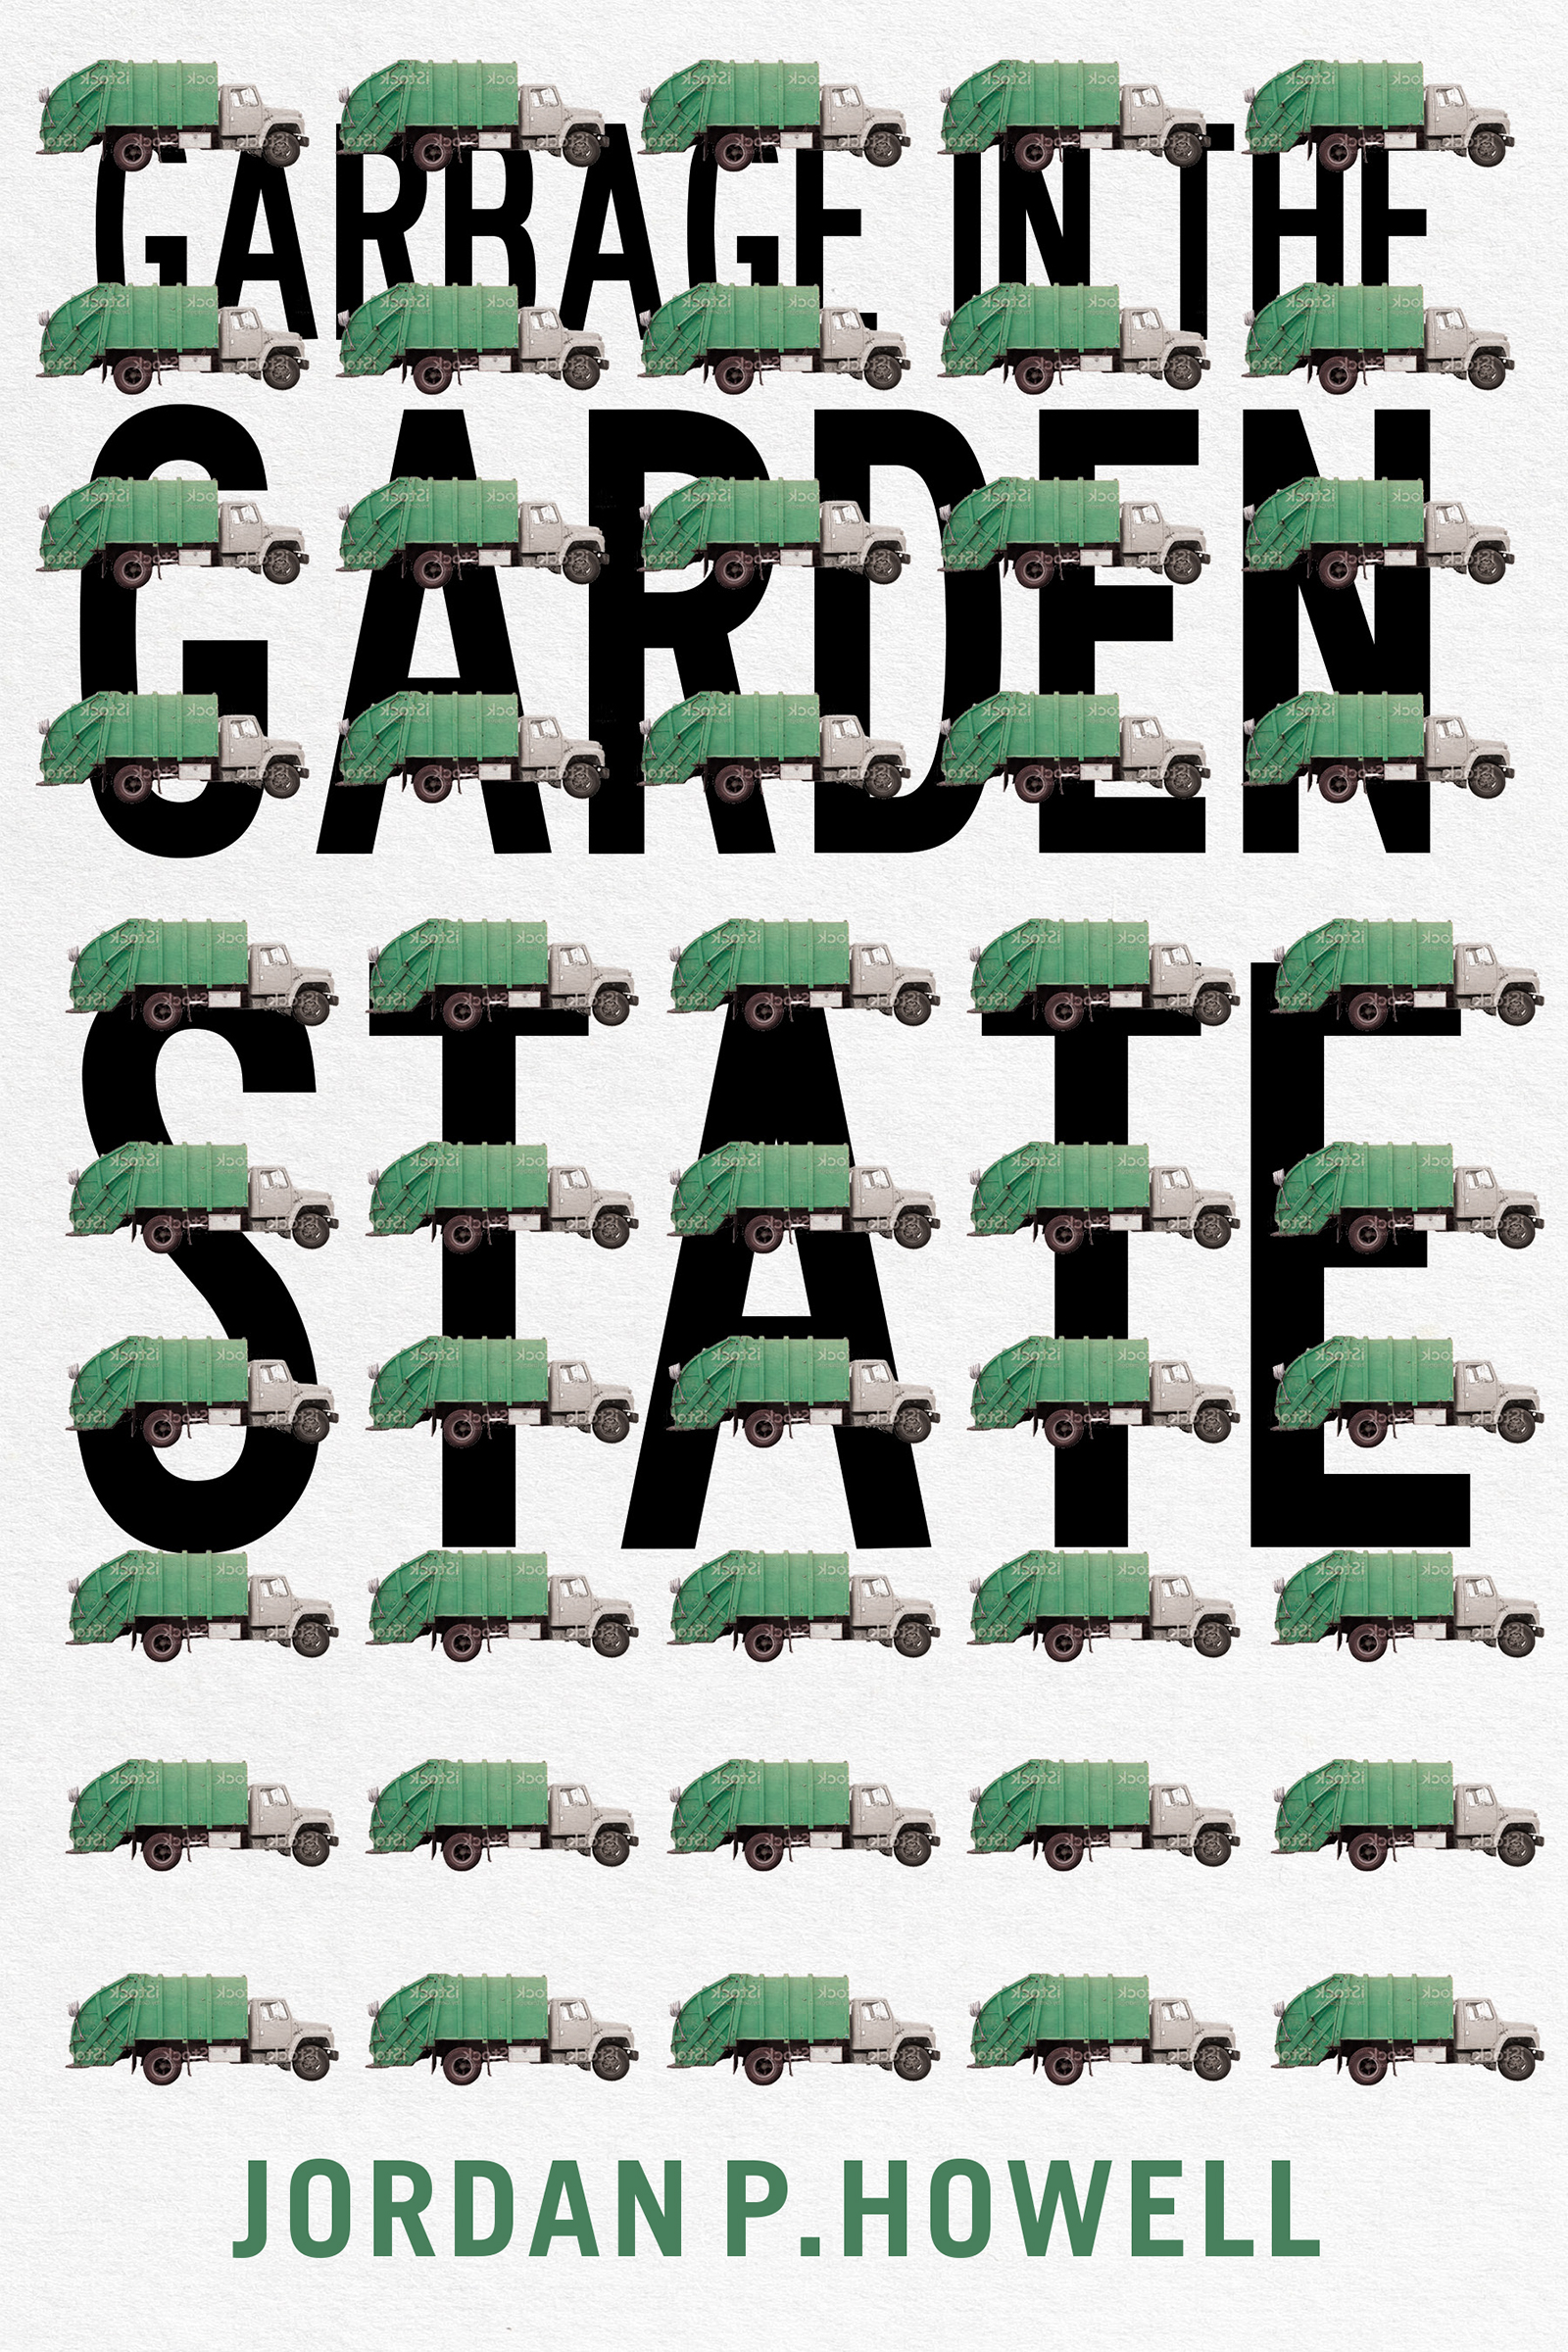 Garbage in the Garden State